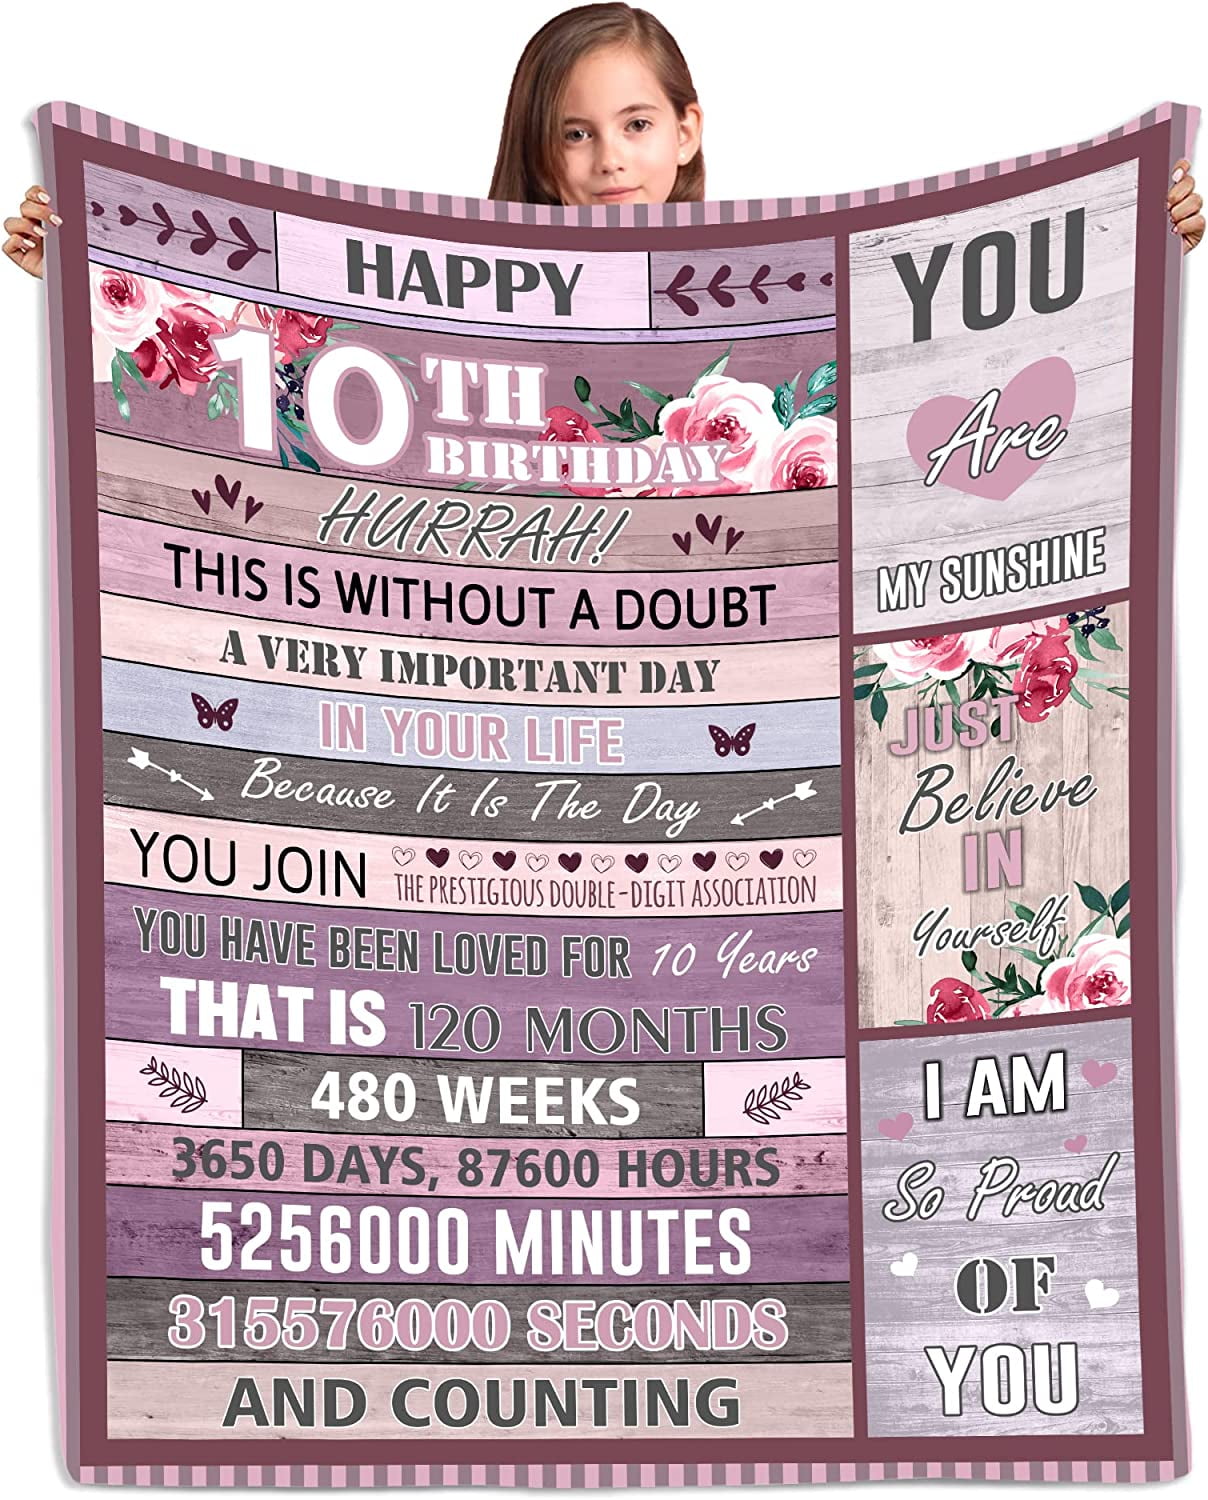 11 Year Old Girl Gift Ideas Blanket 60X50 - Birthday Gifts for 11 Year  Old Girls - 11 Year Old Girl Gifts - 11th Birthday Gifts for Girls - Best  11